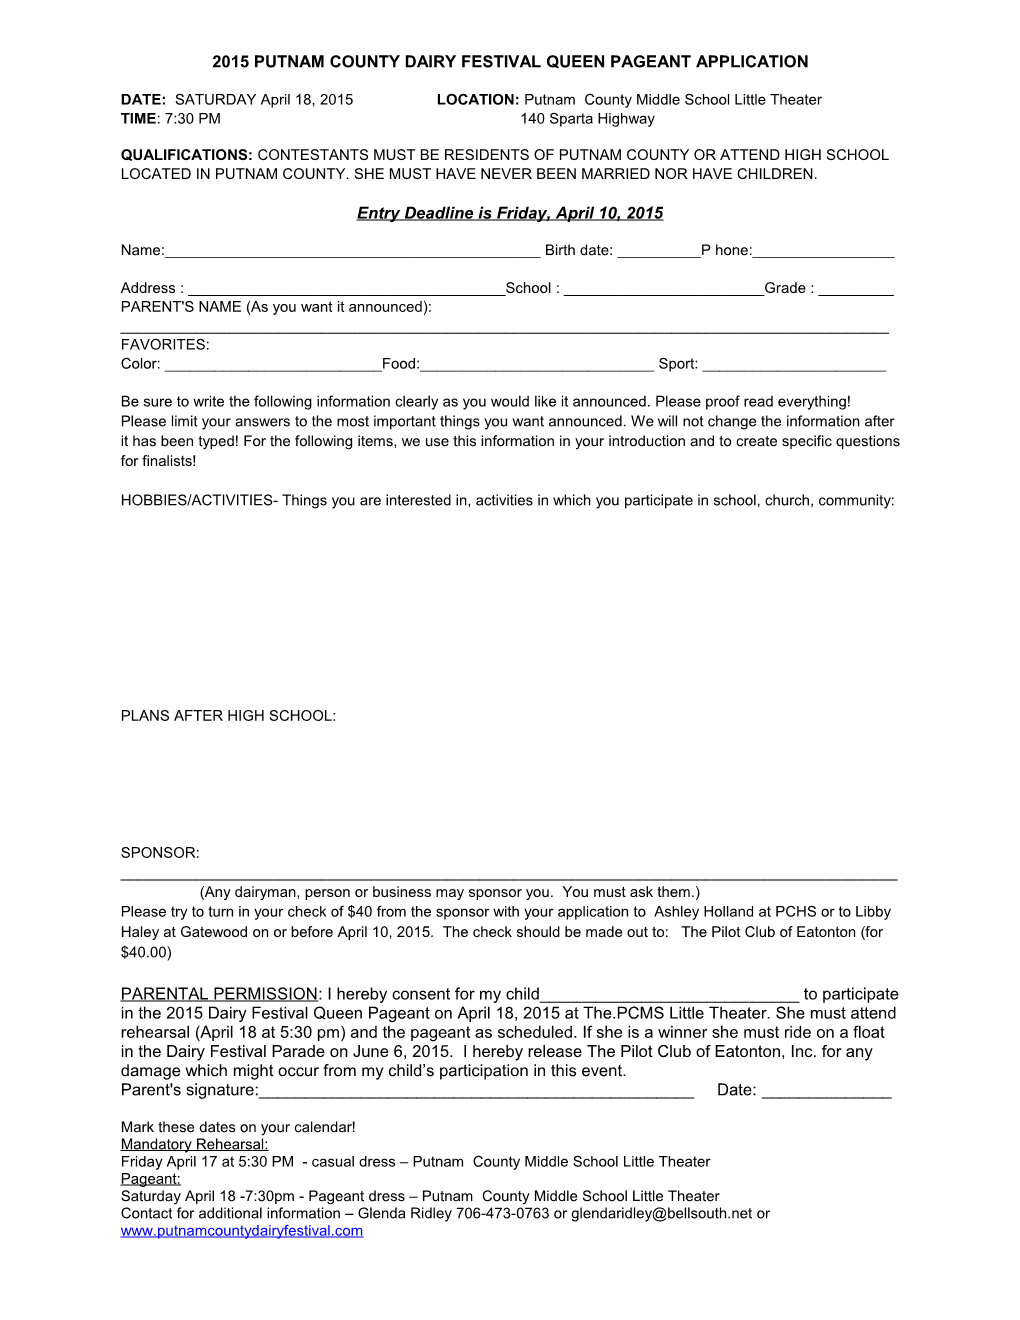 2009 Putnam County Dairy Festival Queen Pageant Application